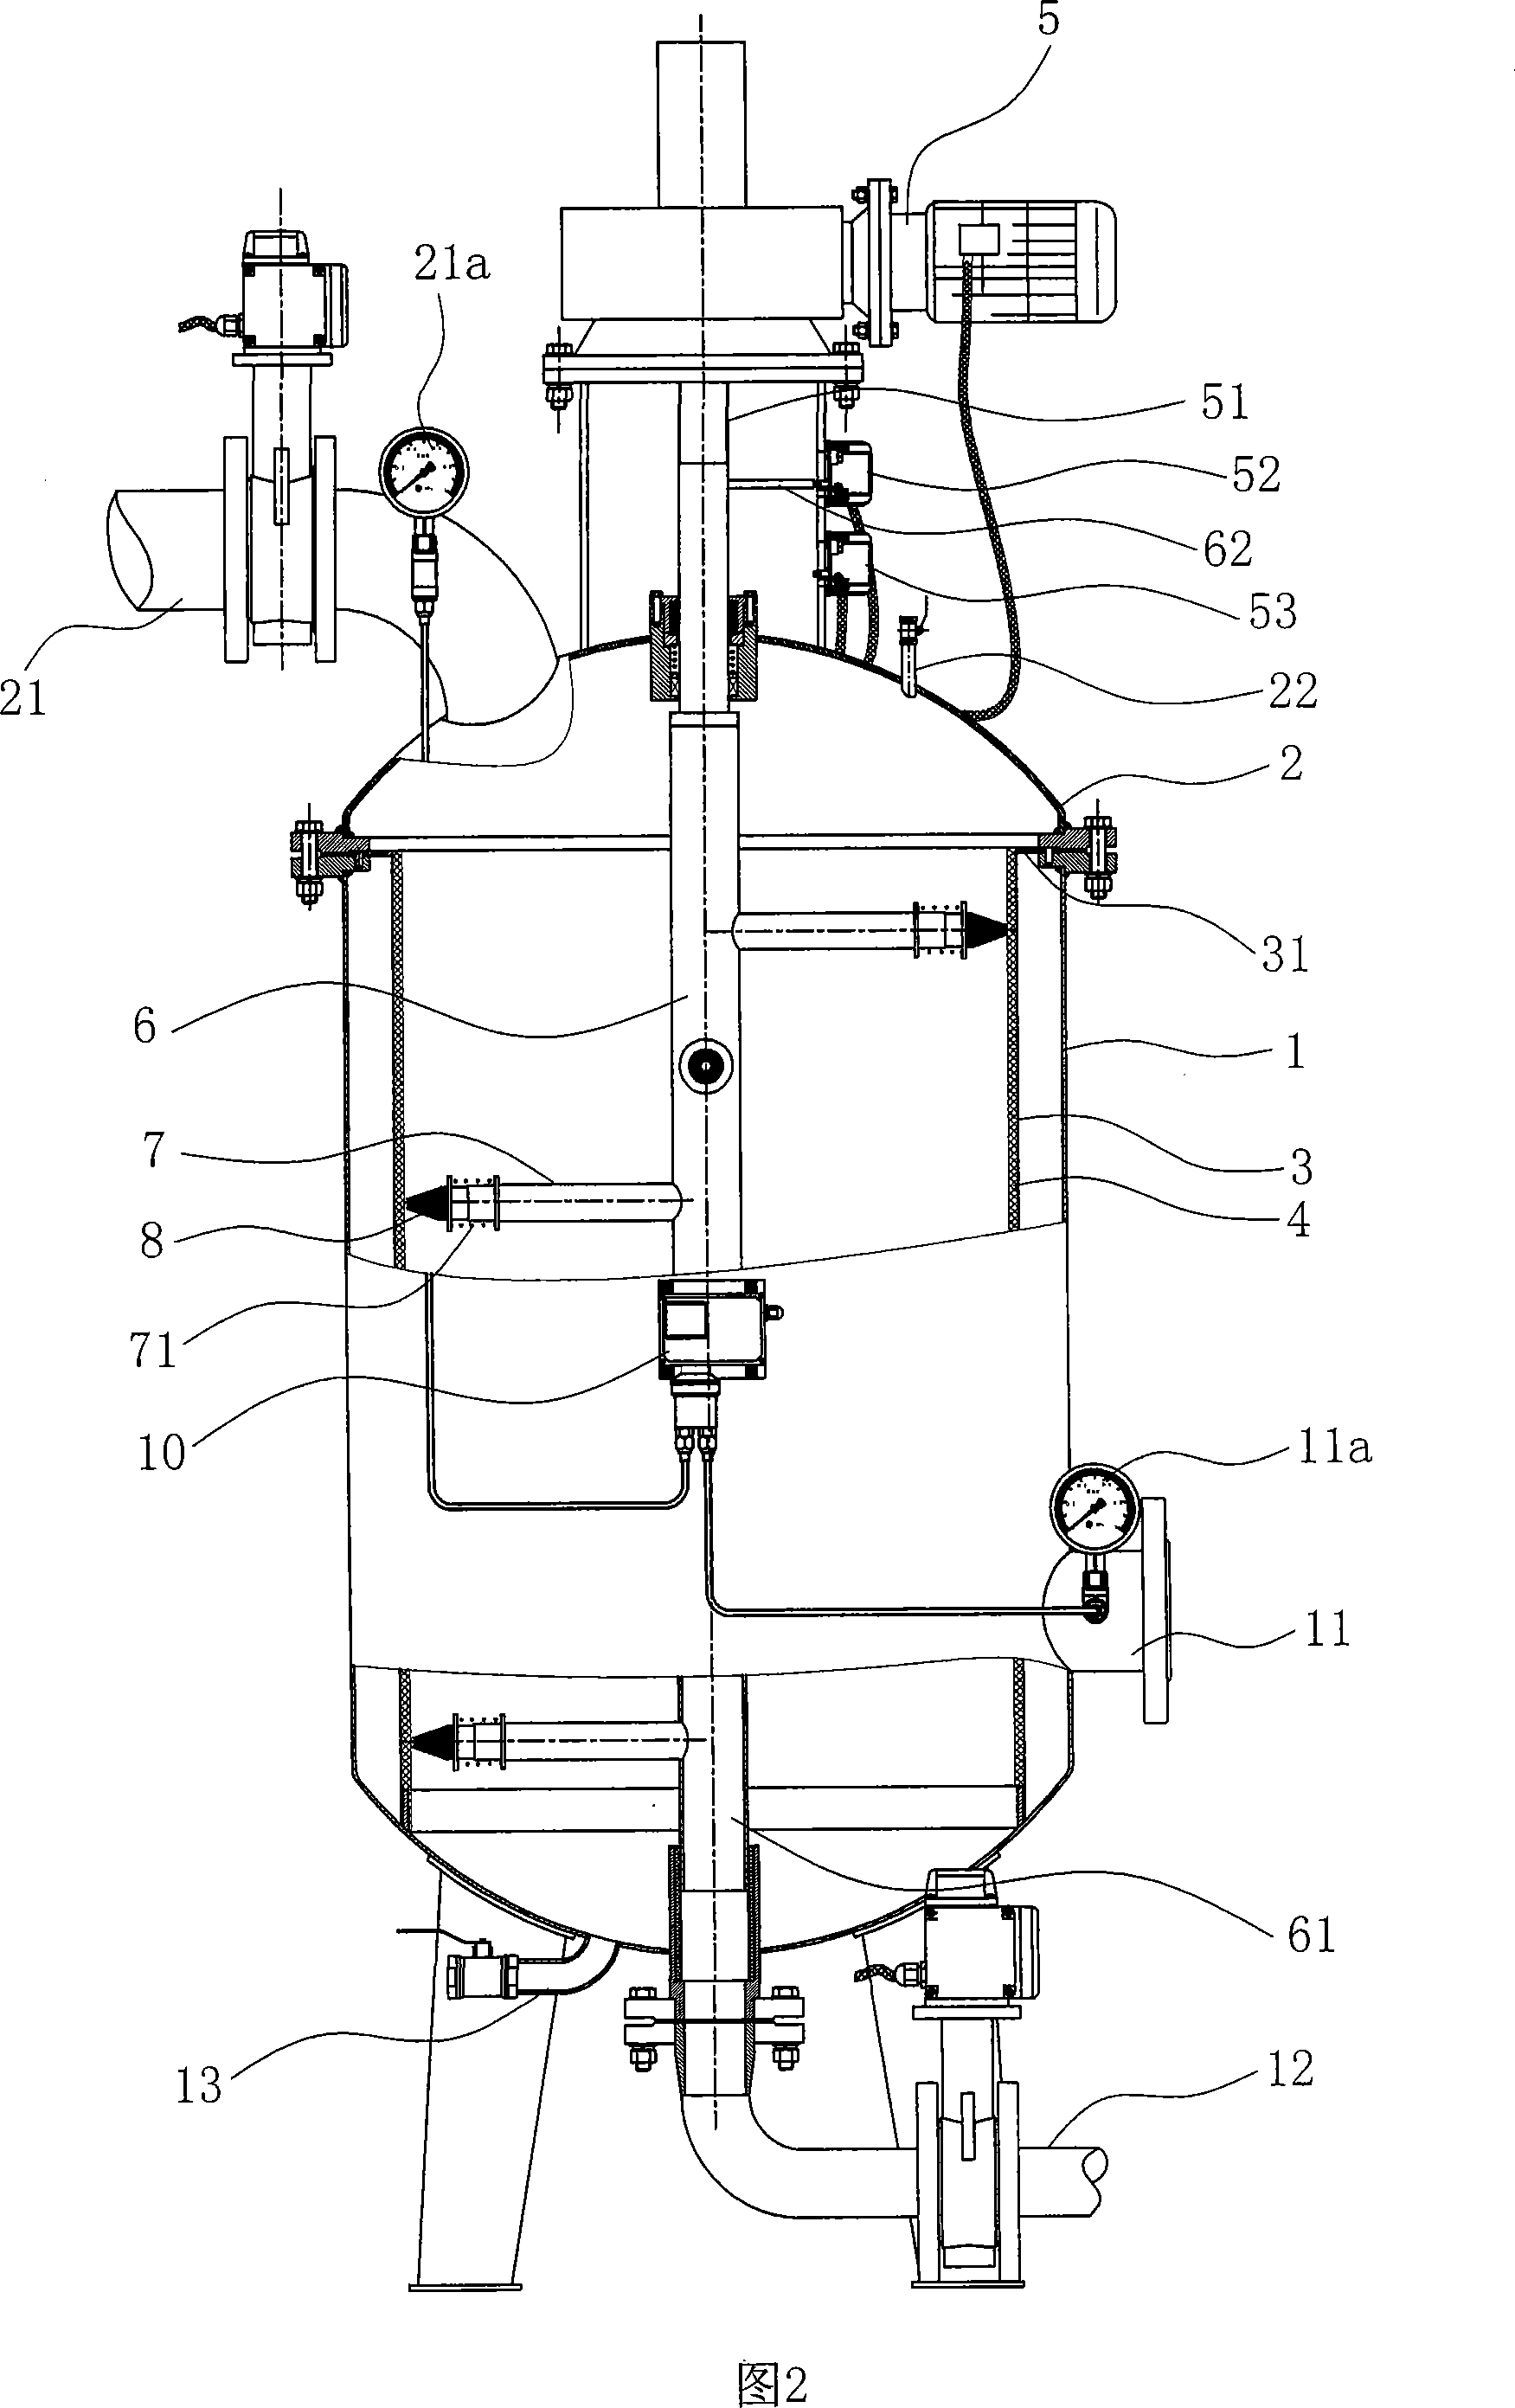 Filter capable of removing suspended substance in water